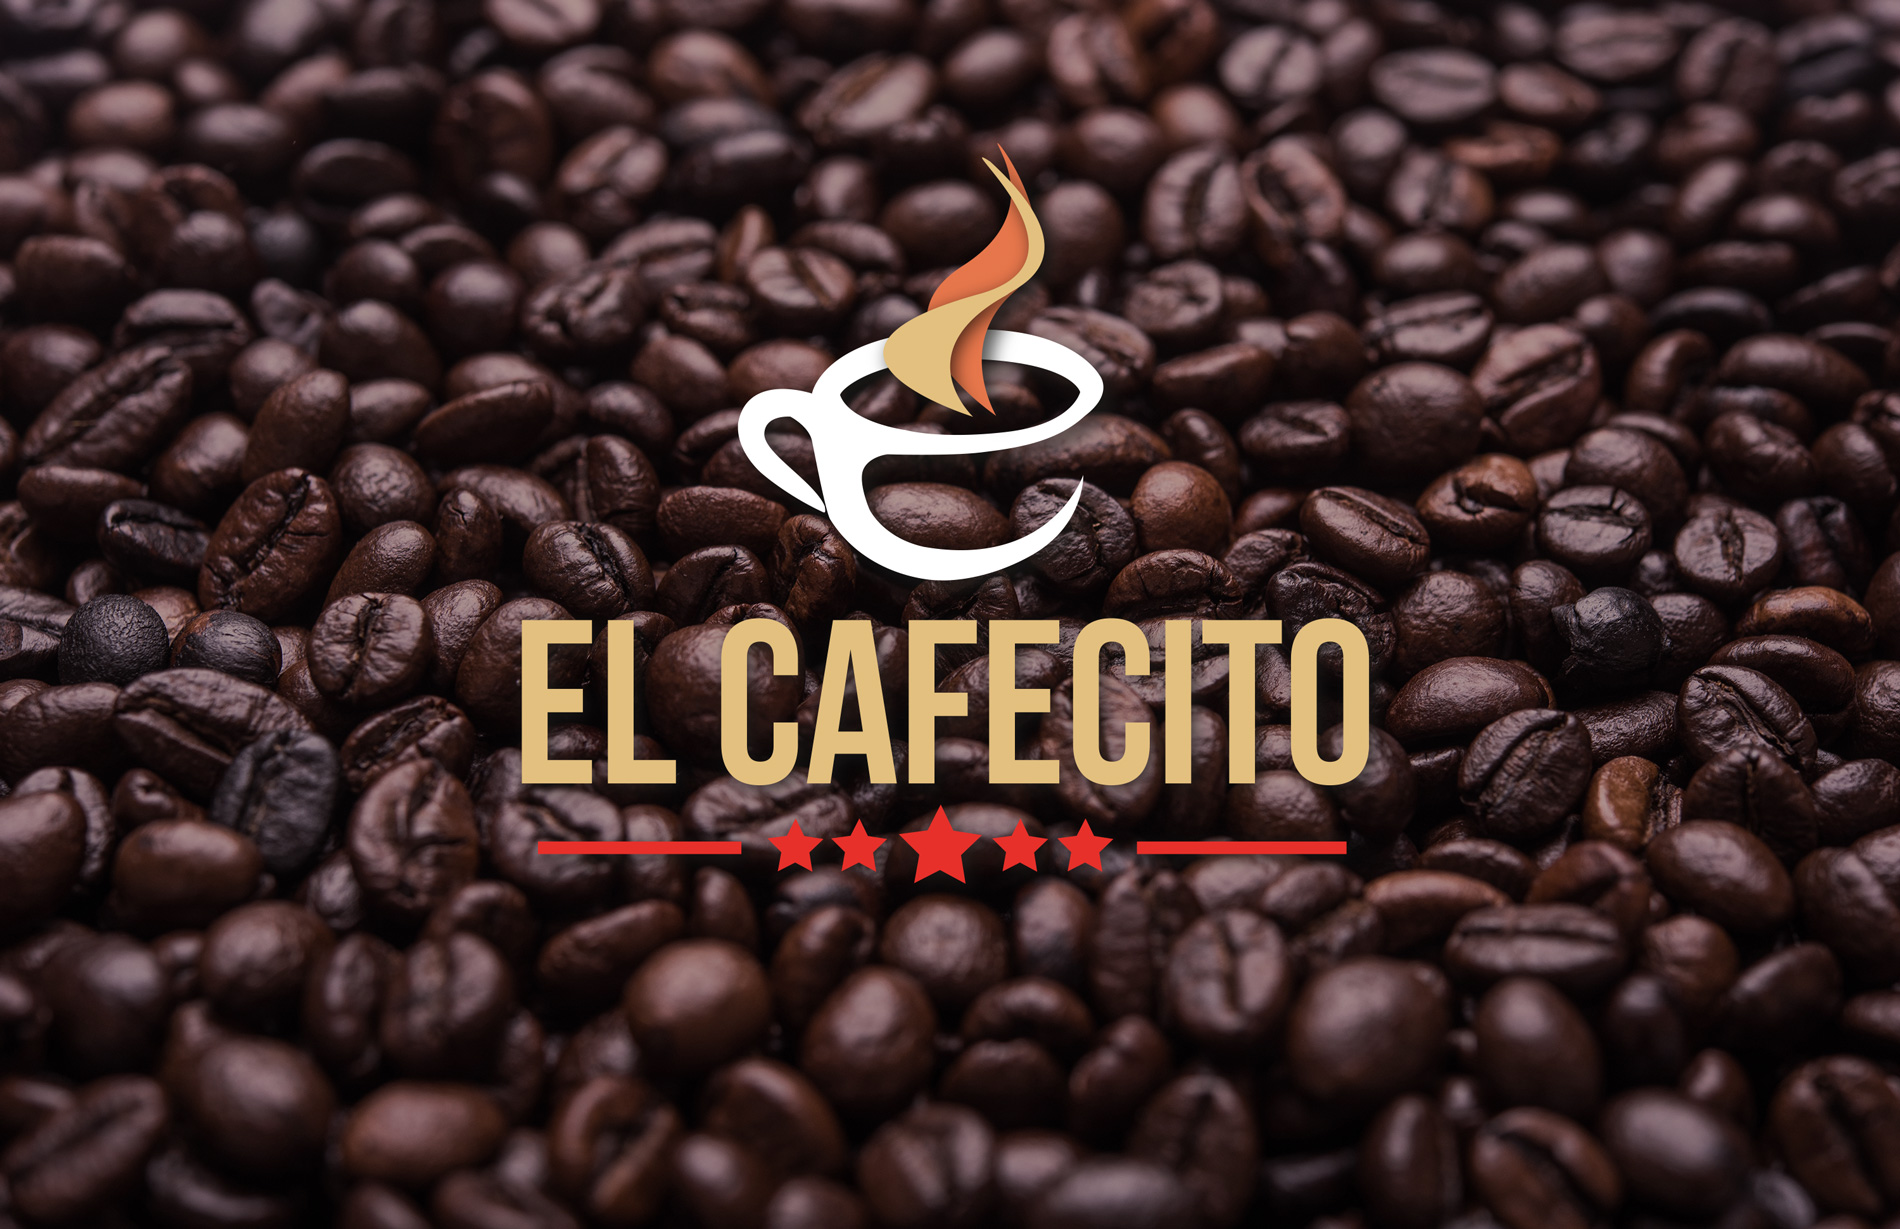 Portfolio of logo and brand design work for coffee shop in Mexico